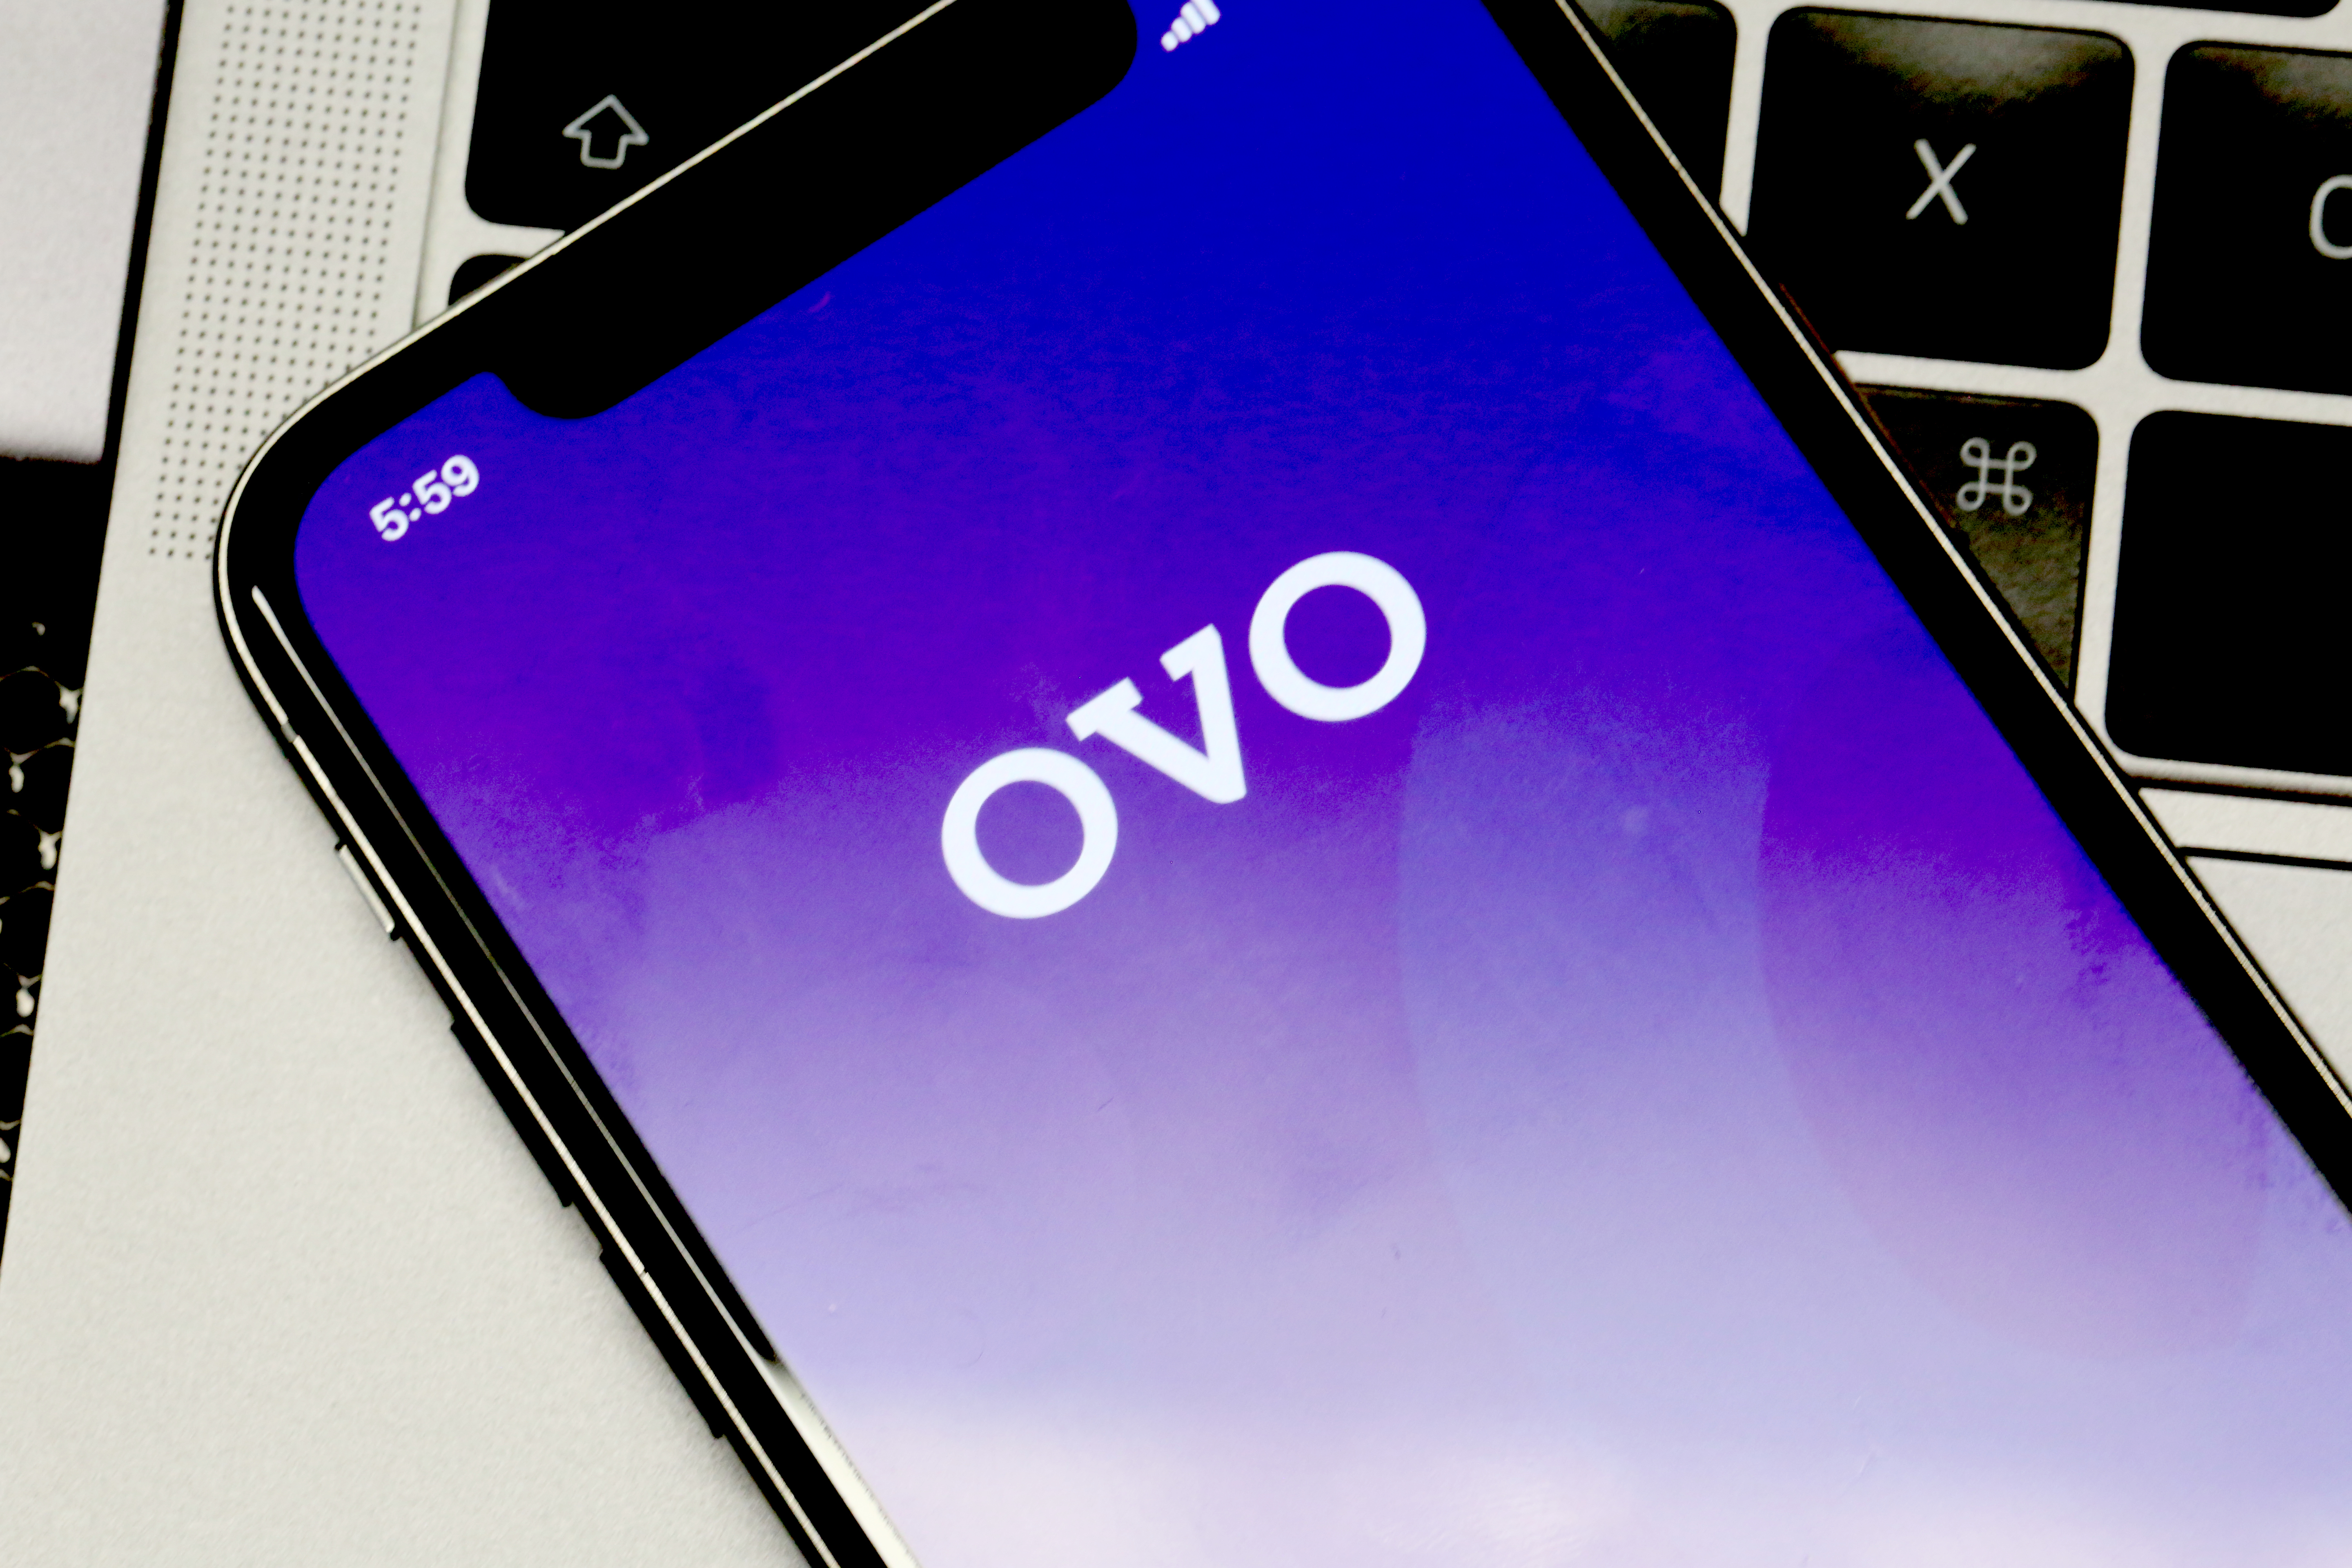 Indonesian e-wallet player Ovo to expand its financial offerings, president director says